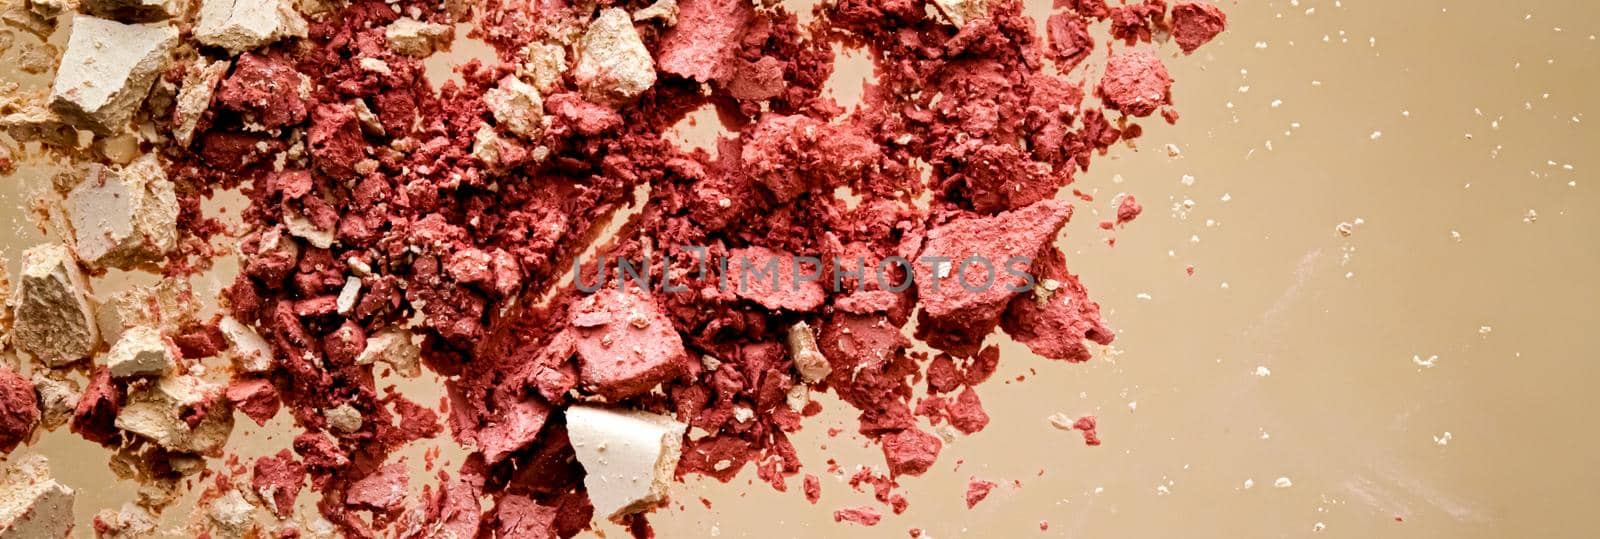 Crushed cosmetics, mineral organic eyeshadow, blush and cosmetic powder isolated on golden background, makeup and beauty banner, flatlay design by Anneleven